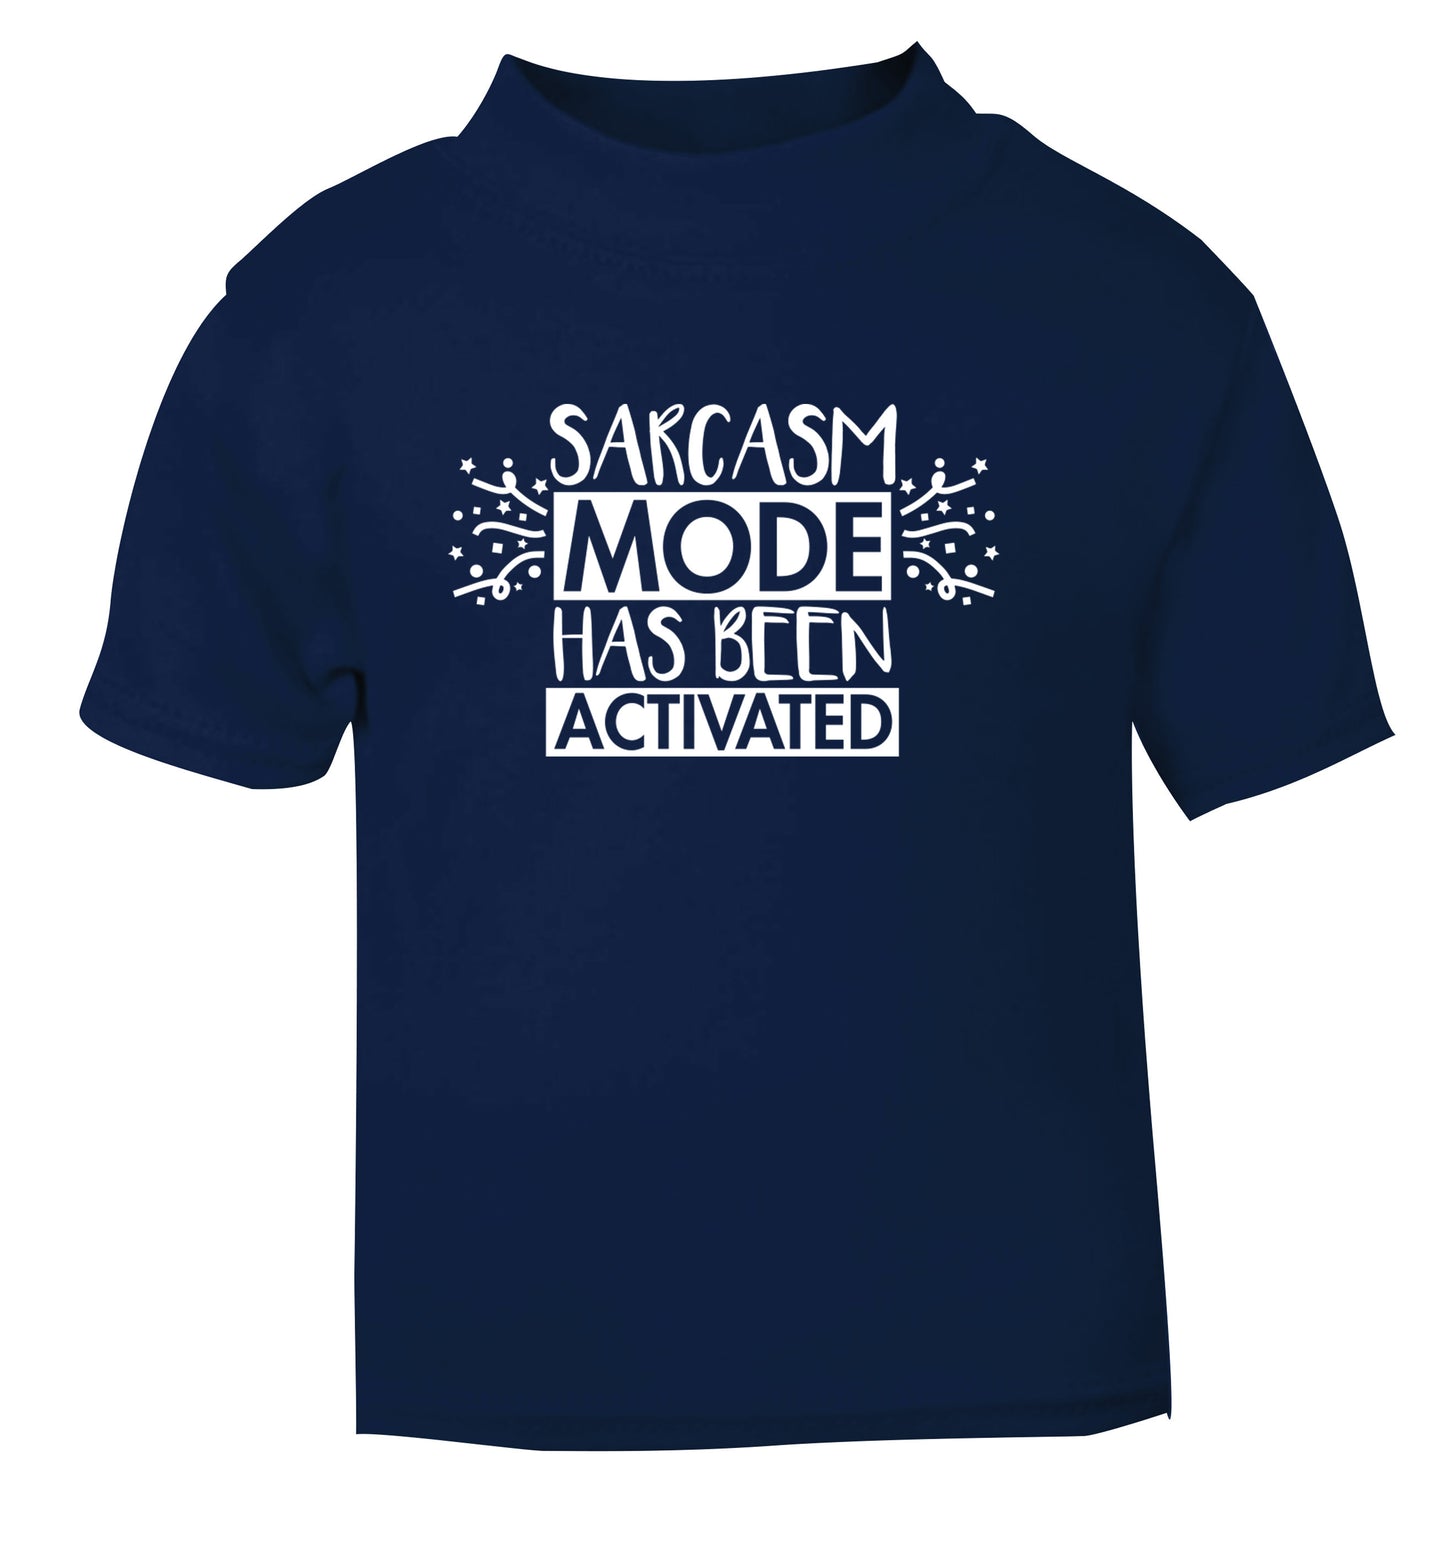 Sarcarsm mode has been activated navy Baby Toddler Tshirt 2 Years